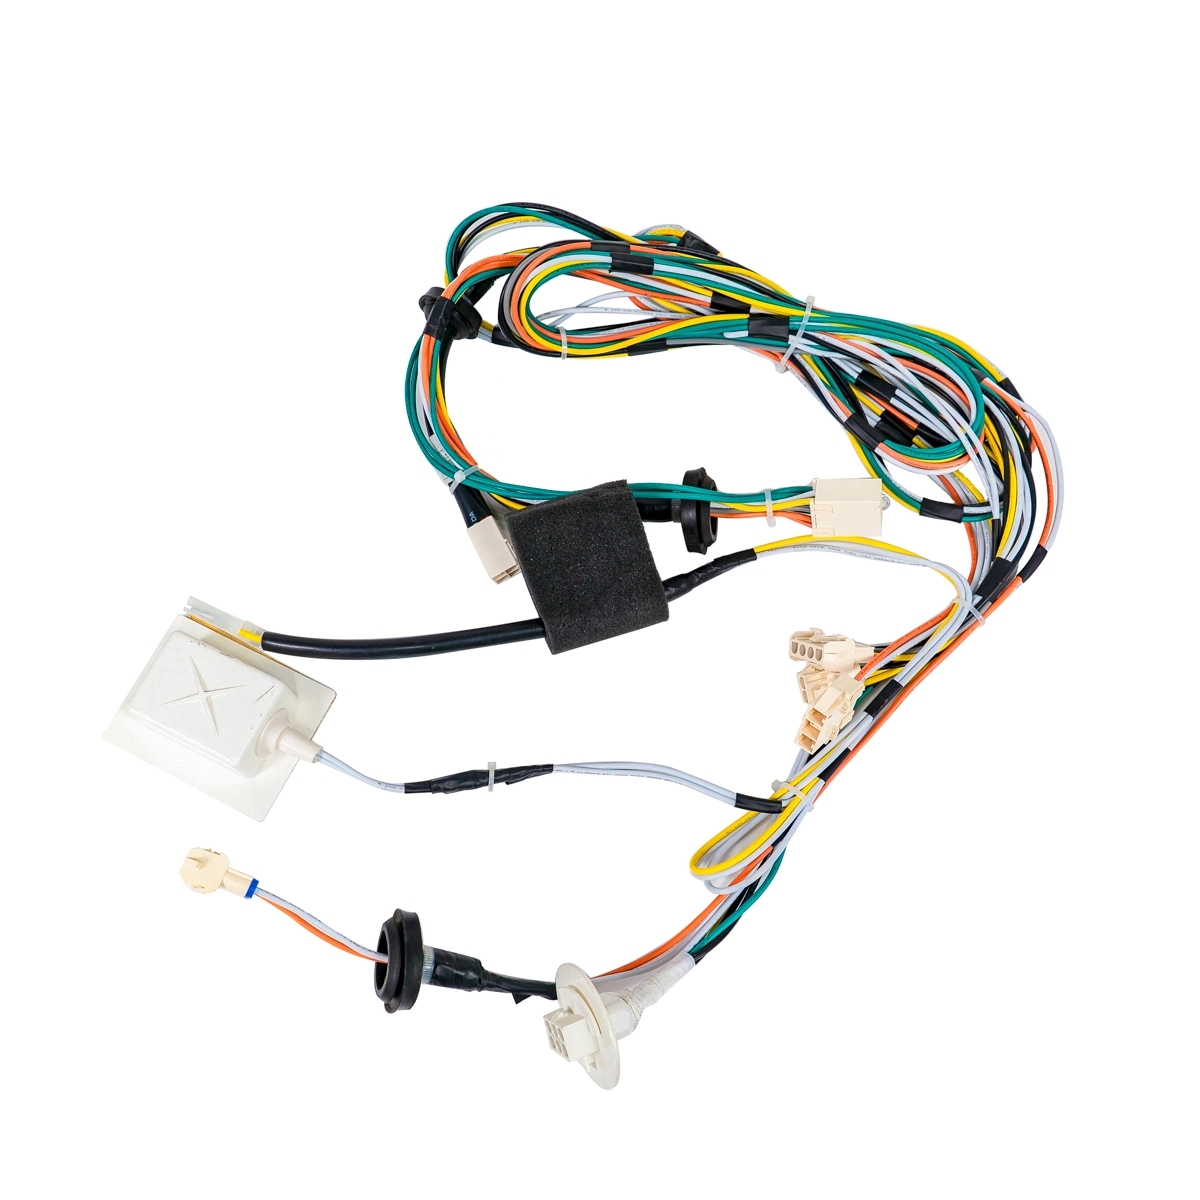 Cables for Smart Home Wire Harness, Smart Home Cable, Smart Home Light Strip